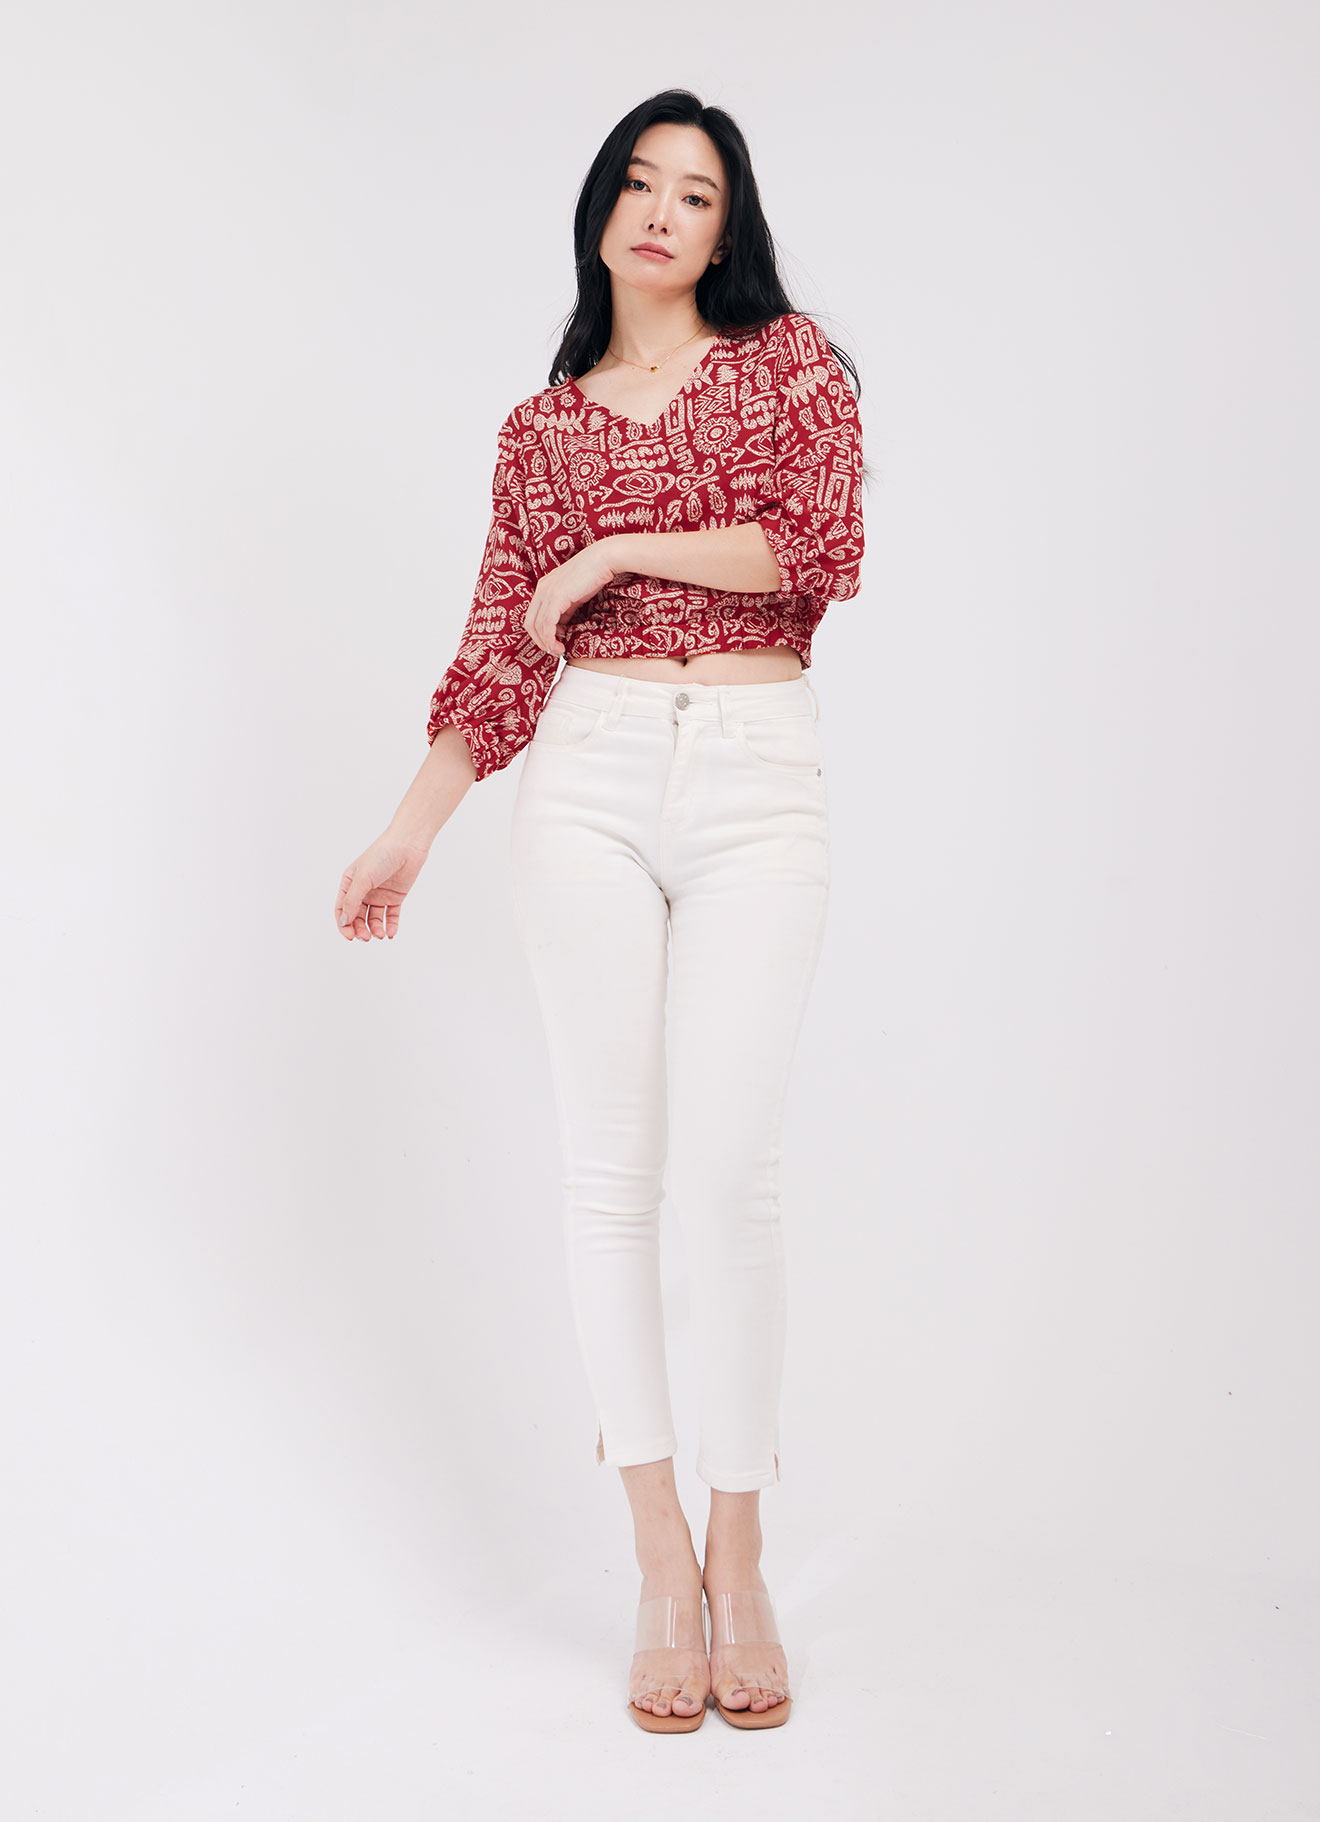 Chili-Pepper by Sleeve Top